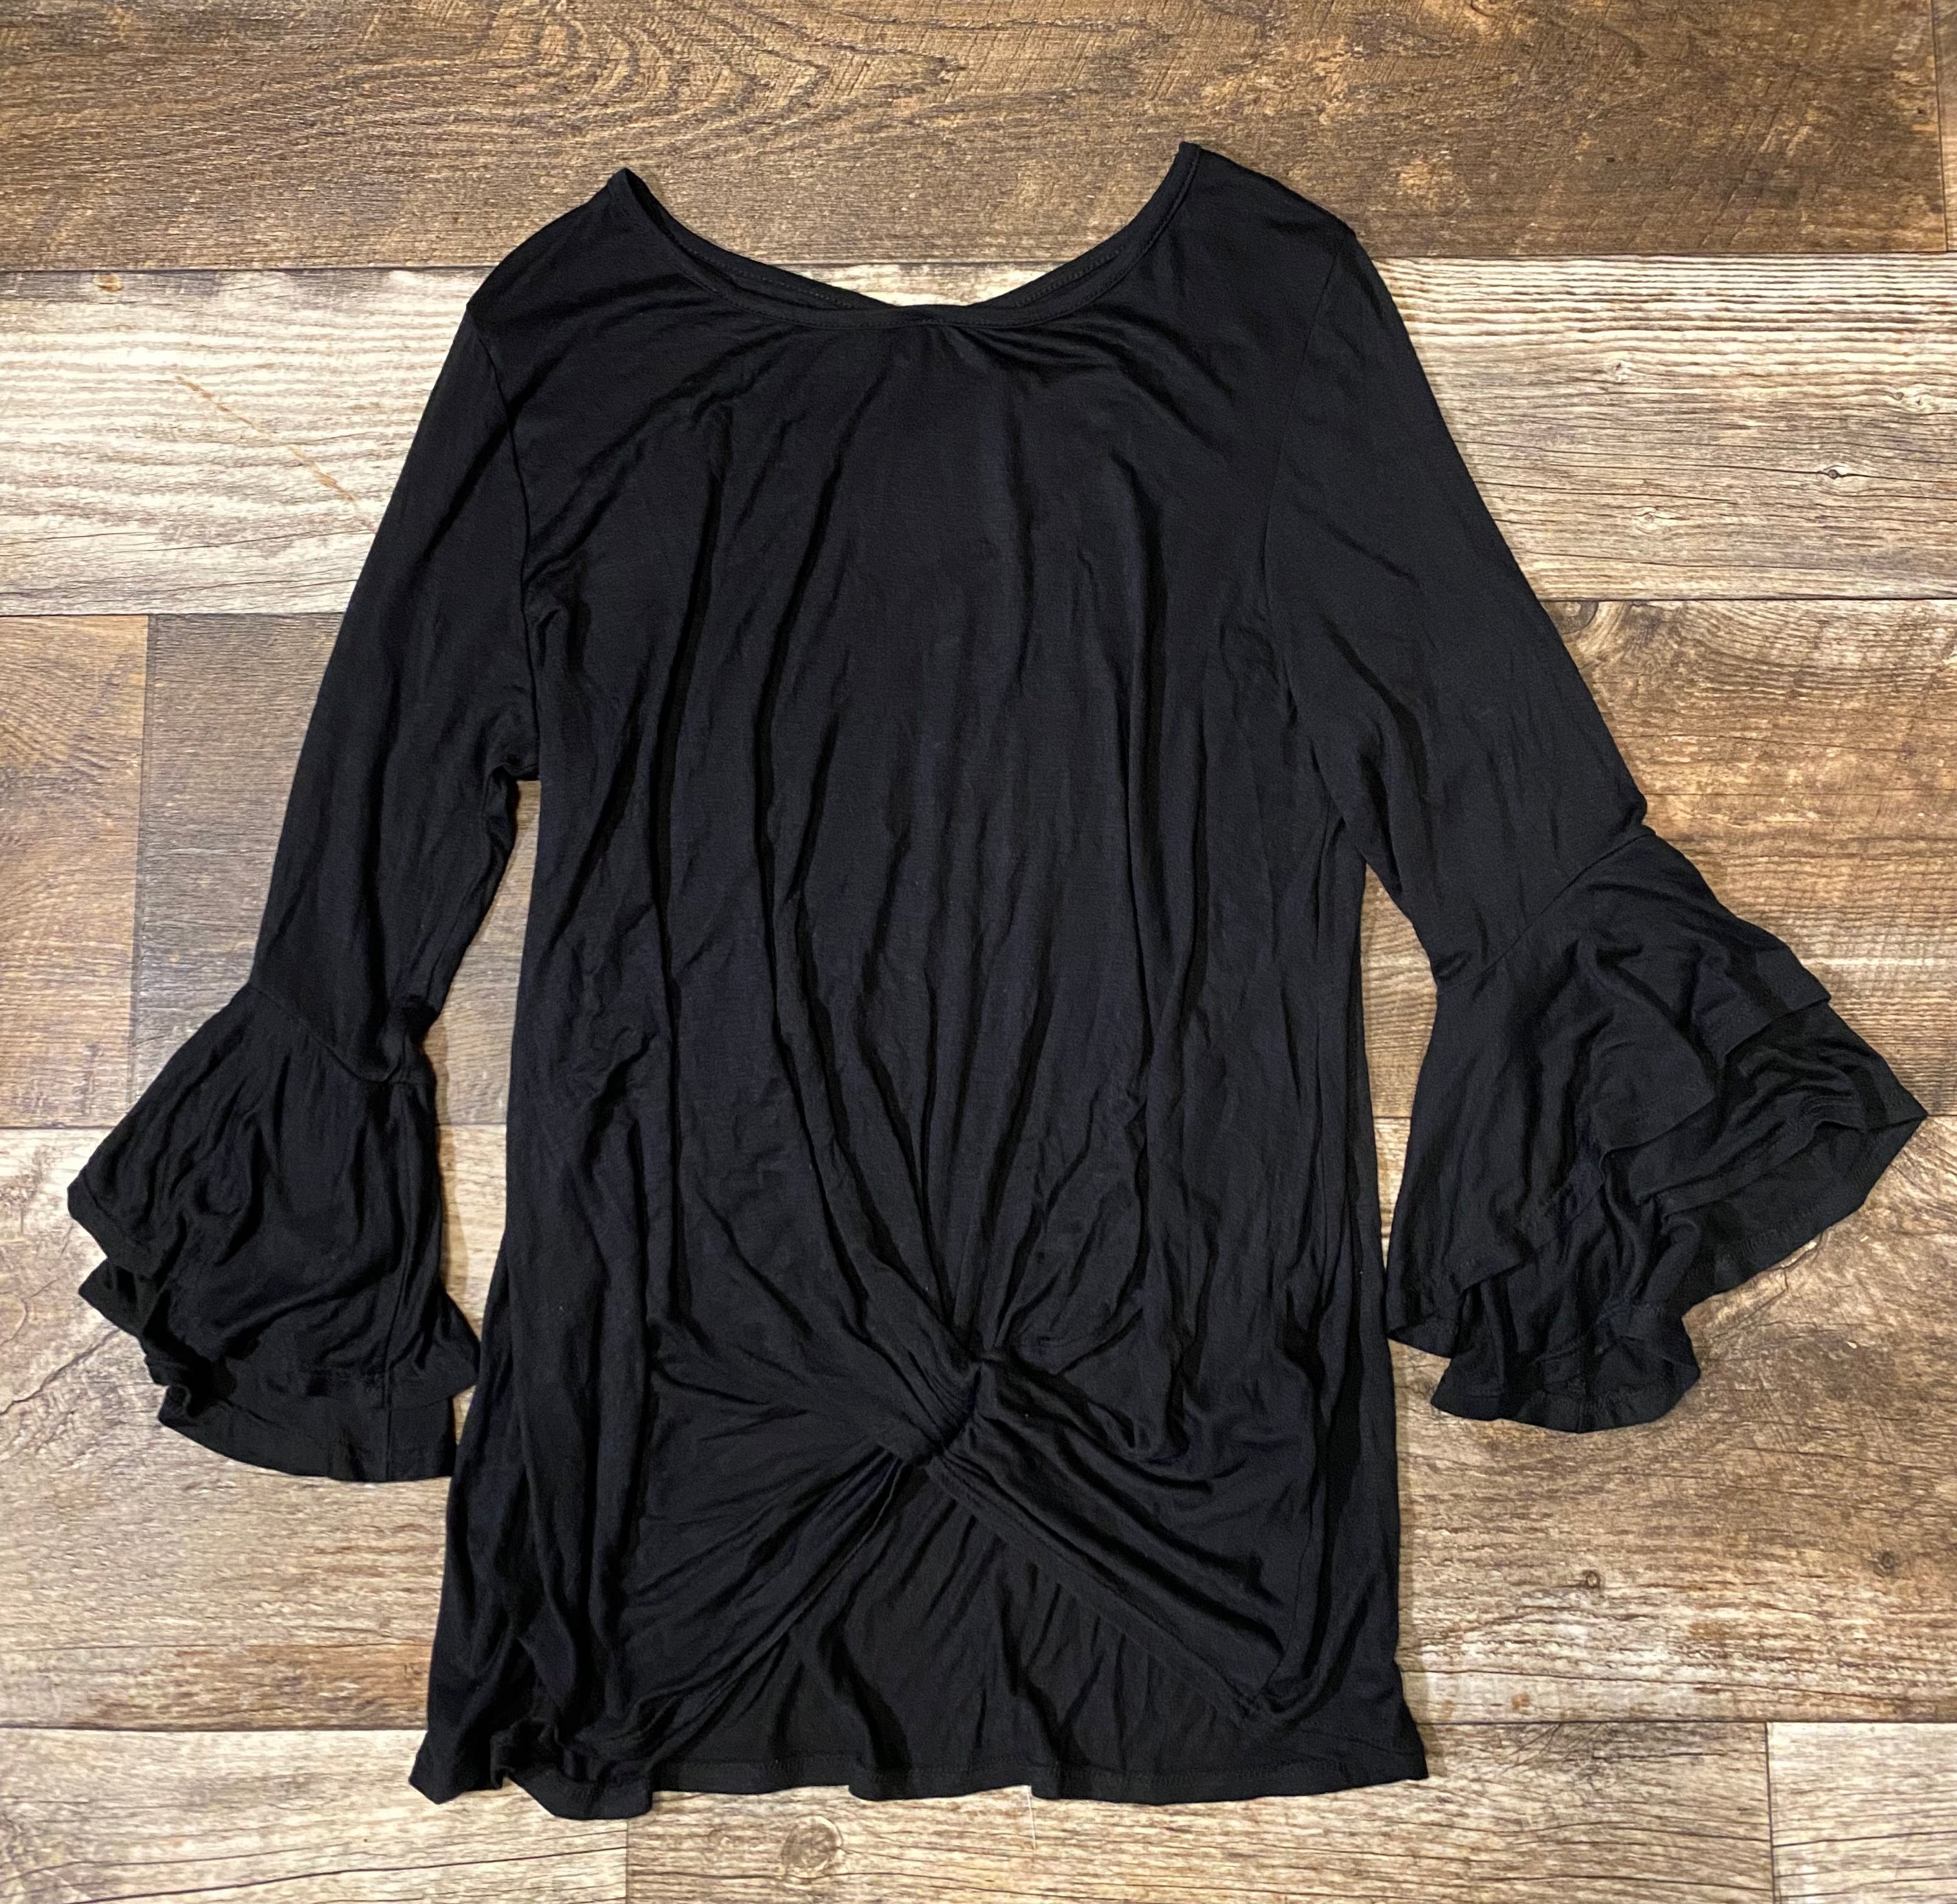 Top - Mysterious Ways Ruffle Sleeves